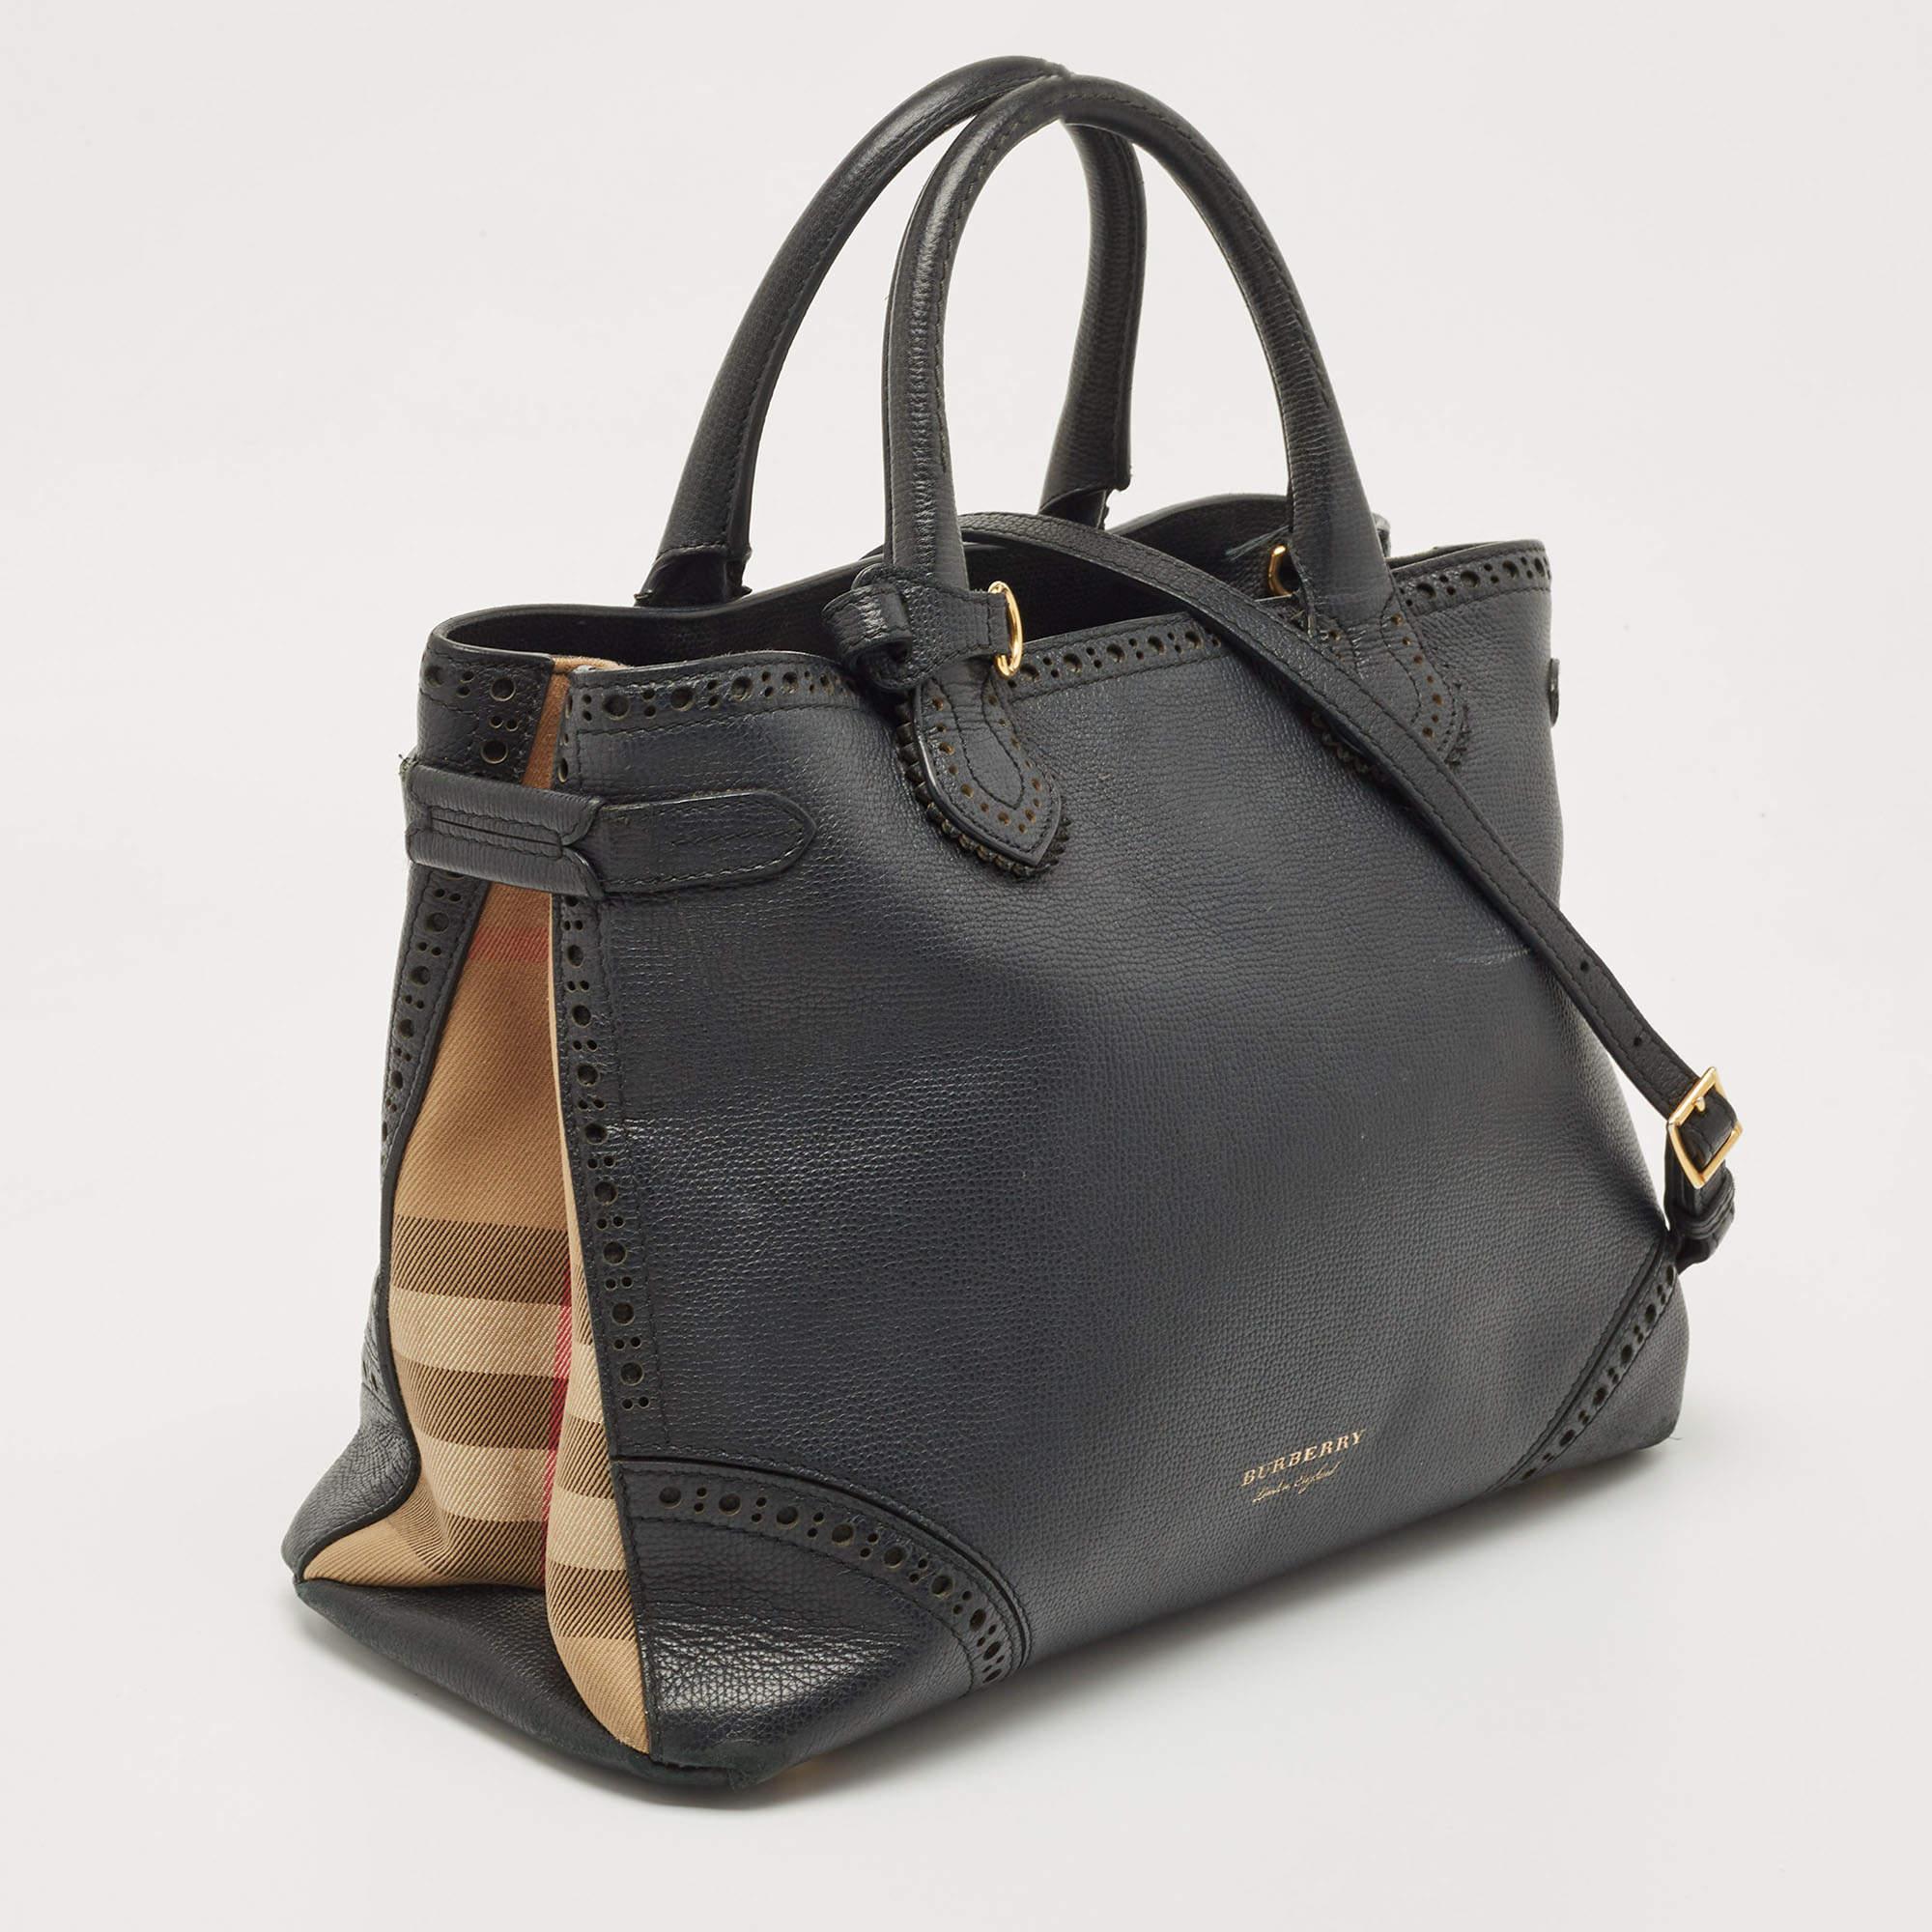 Burberry Black Leather and House Check Fabric Banner Tote In Fair Condition For Sale In Dubai, Al Qouz 2